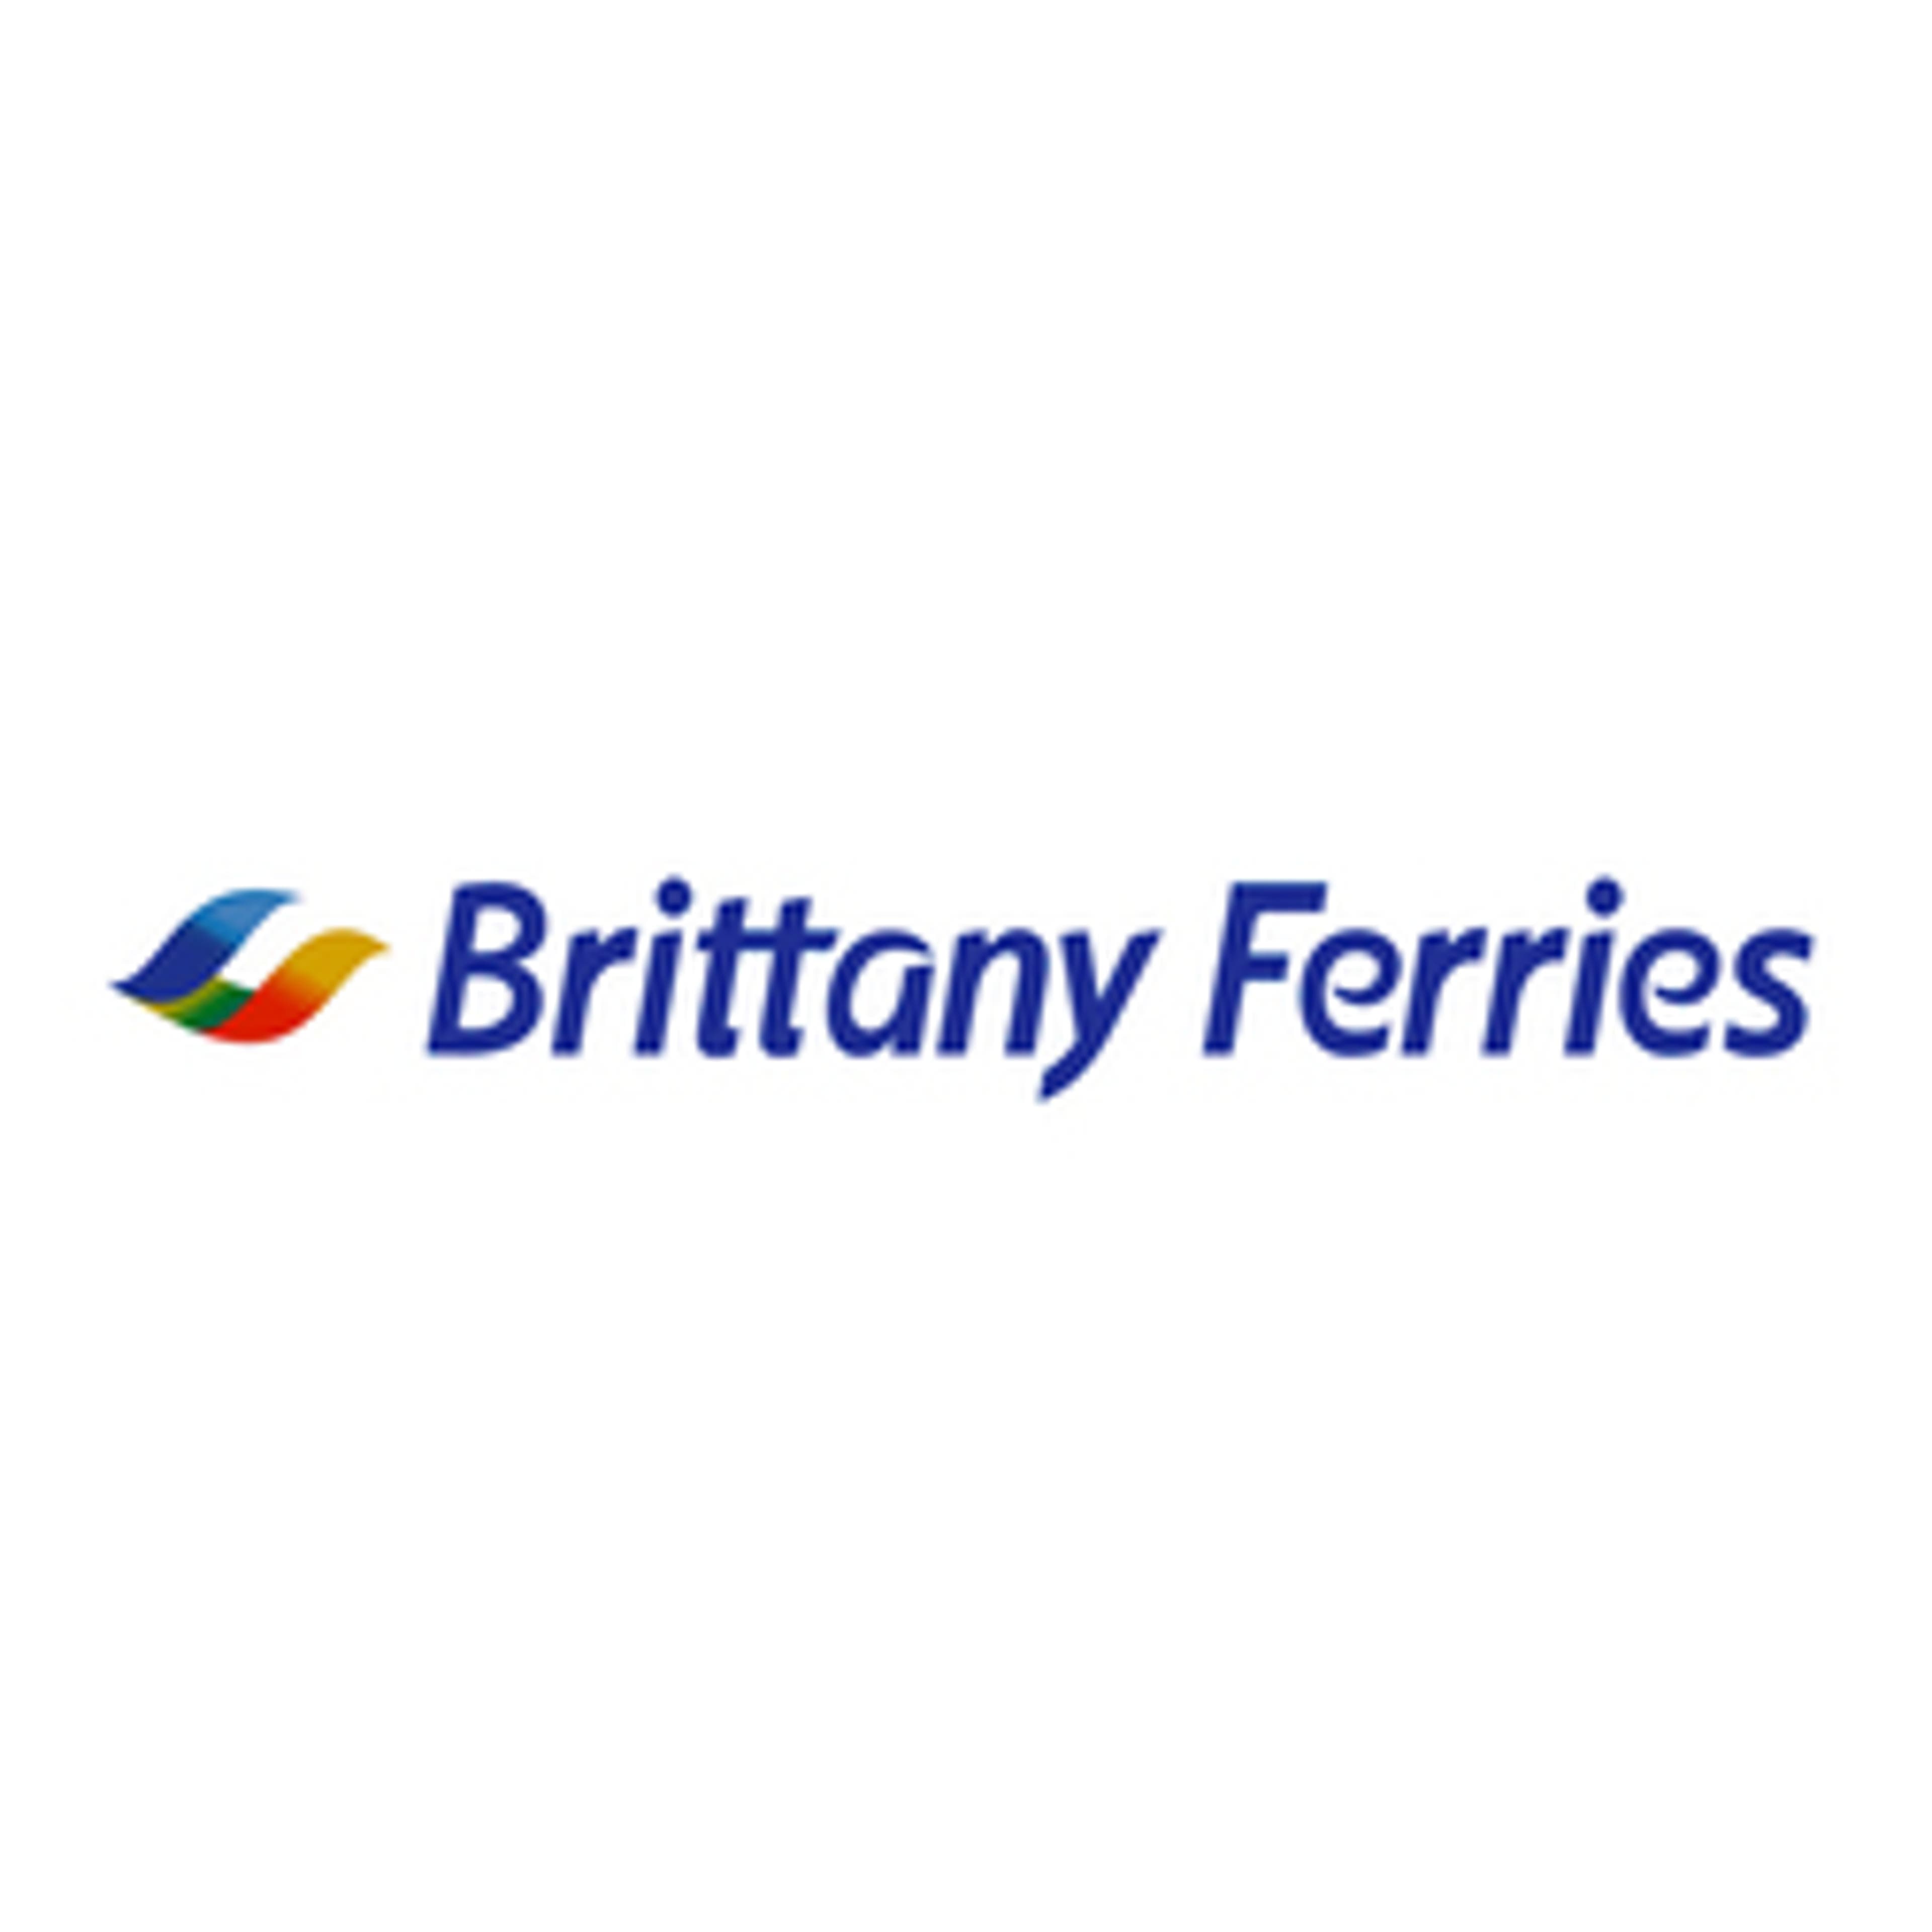  Brittany Ferries 